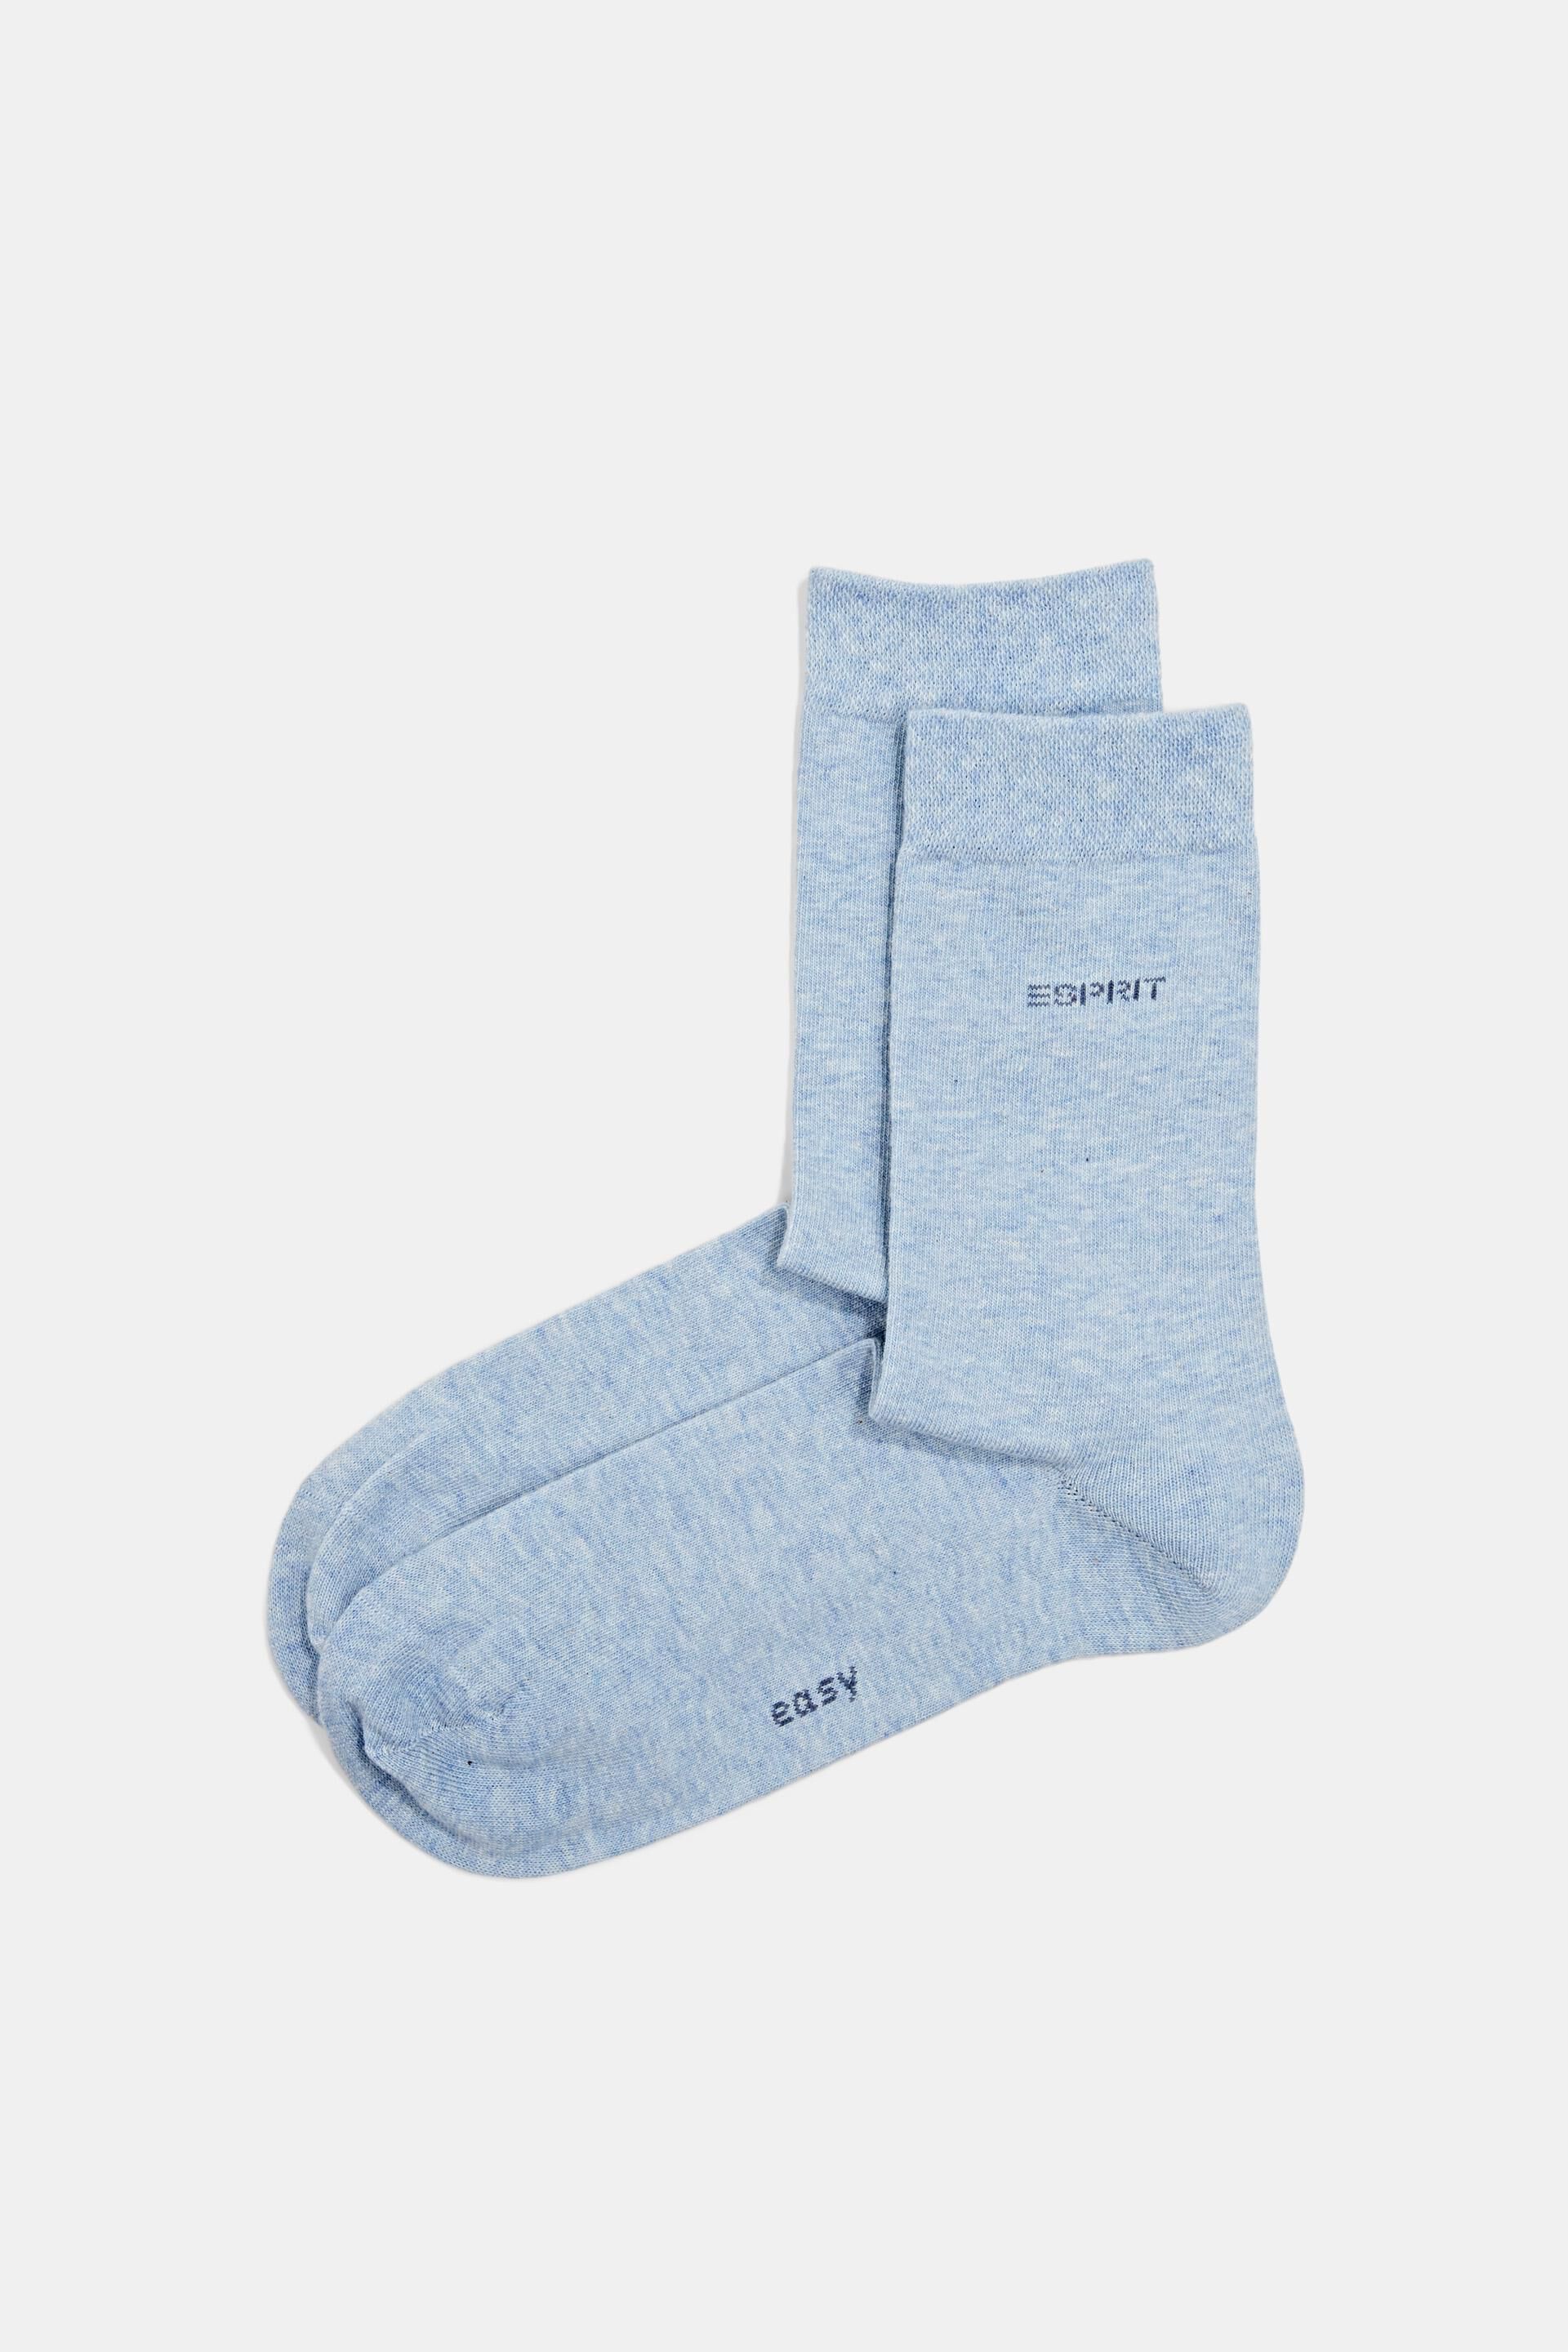 Esprit of pack blended organic Double socks made cotton